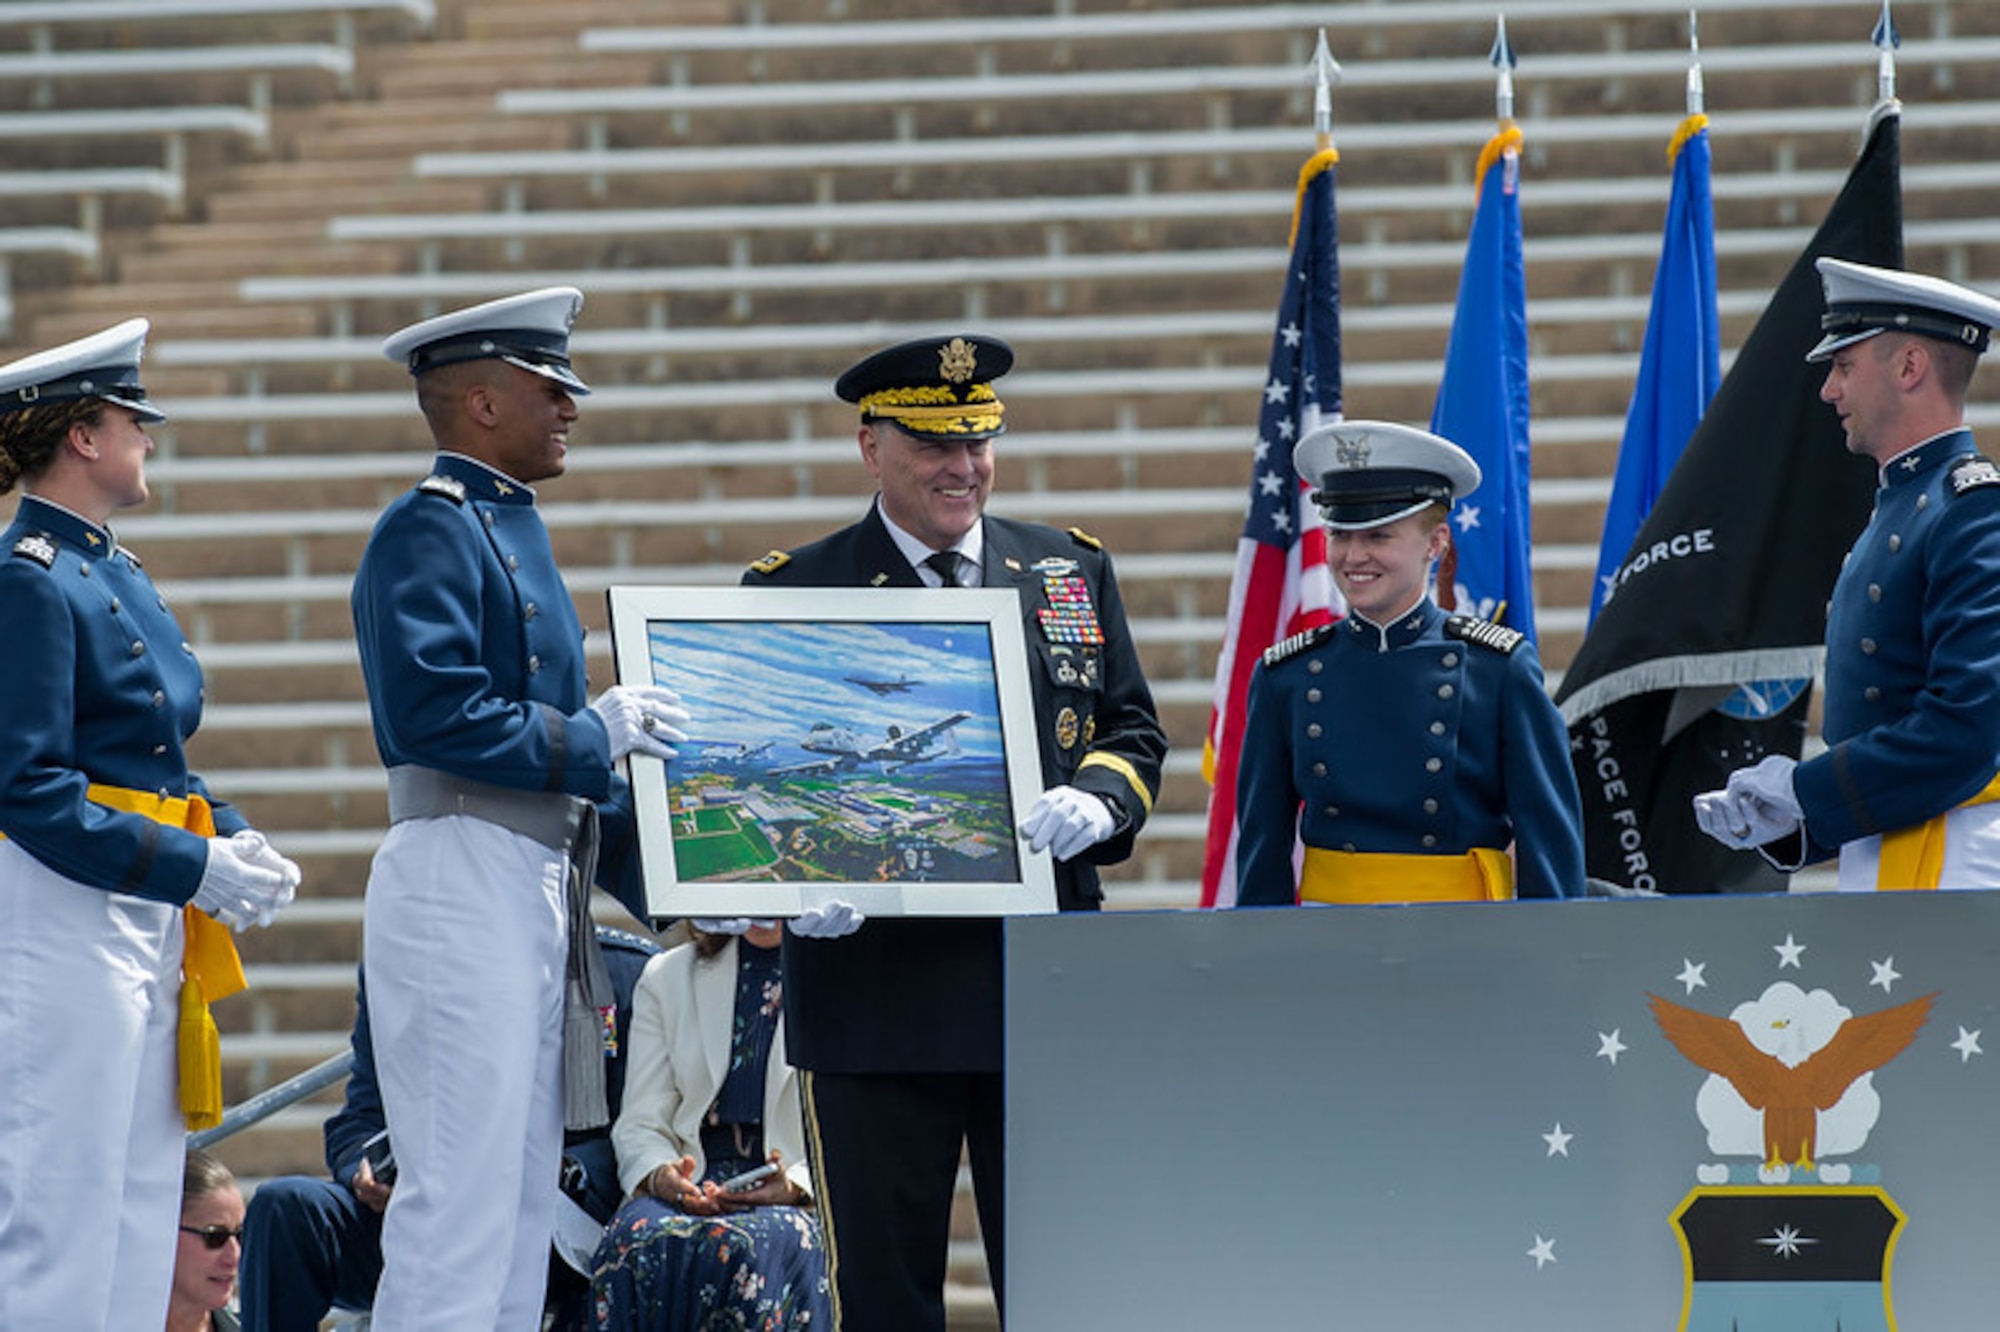 Cadets present the class gift during the U.S. Air Force Academy Class of 2021 Graduation Ceremony at the Air Force Academy in Colorado Springs, Colo., May 26, 2021.